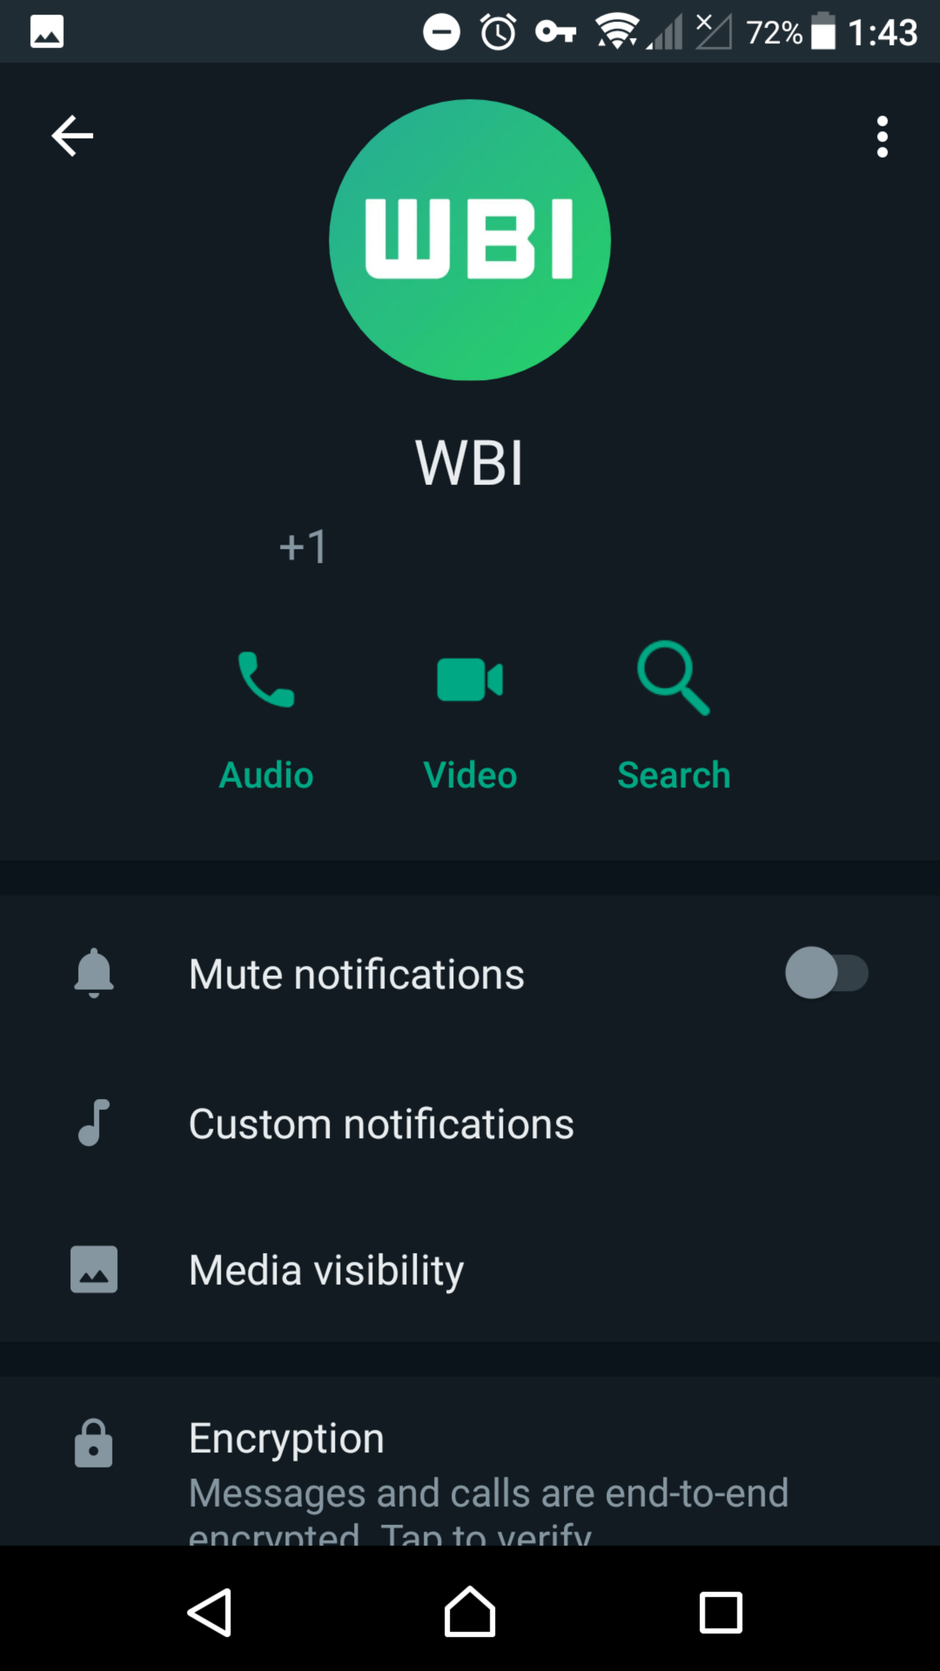 Search shortcut feature on WhatsApp beta for Android - WhatsApp working on search message shortcut, message reactions, and more